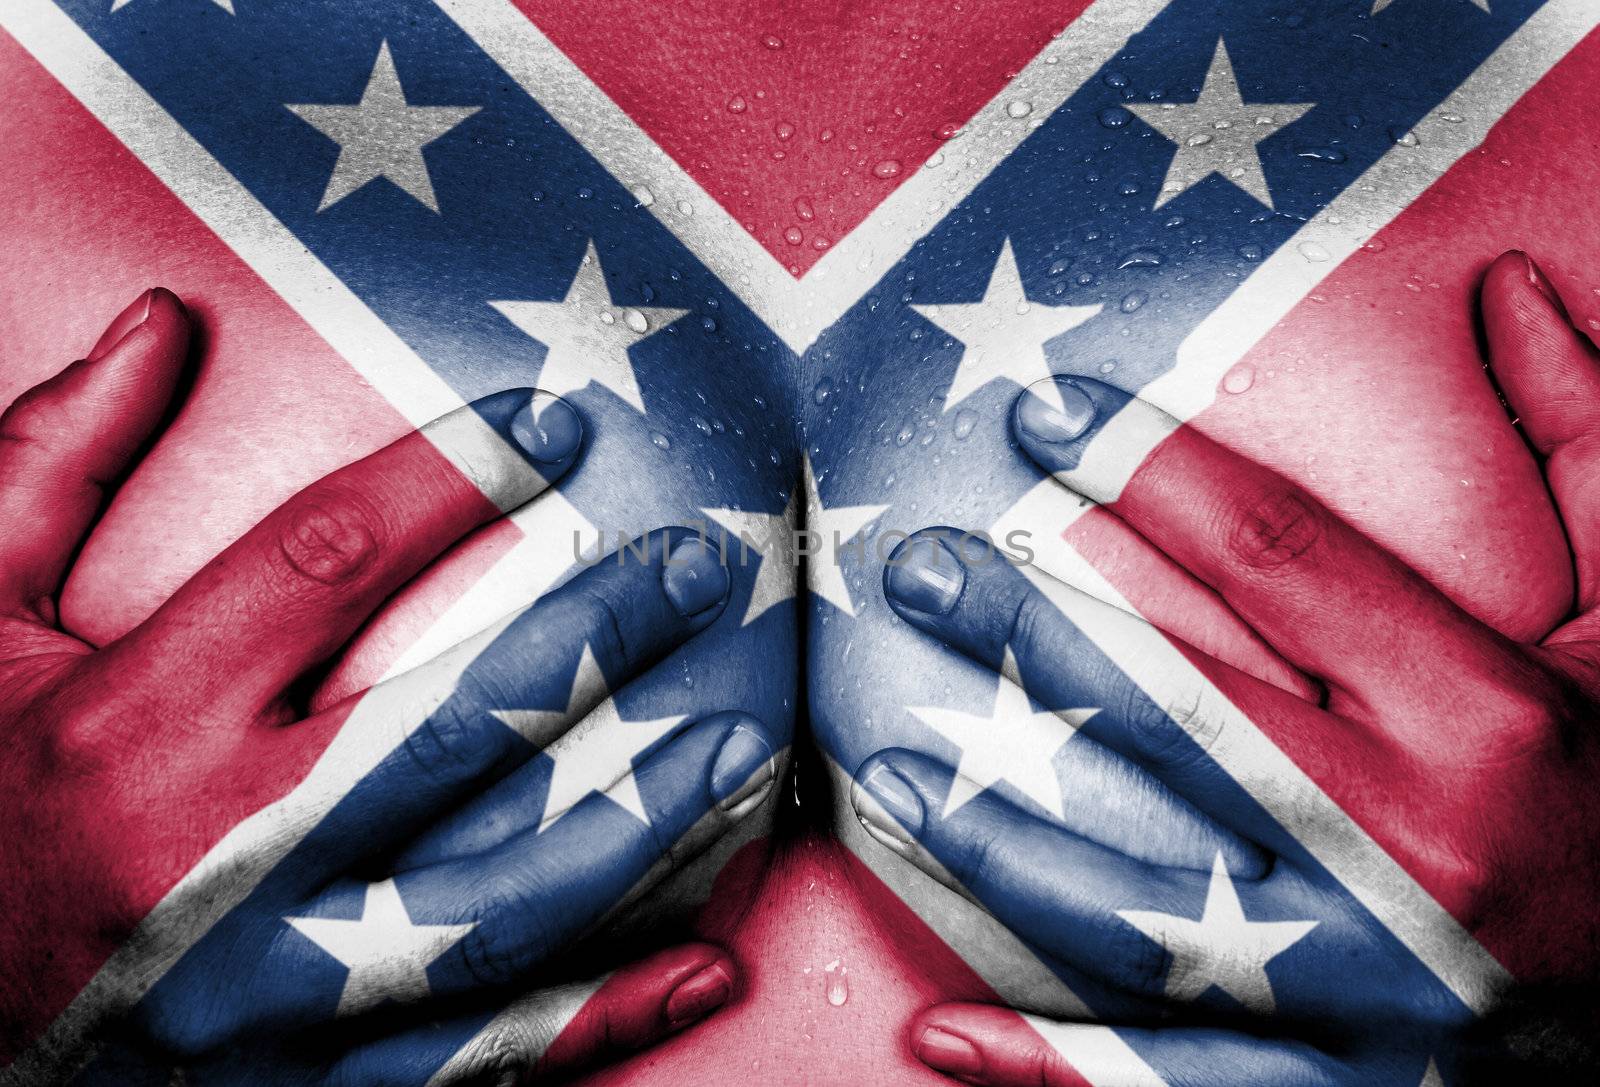 Sweaty upper part of female body, hands covering breasts, confederate flag